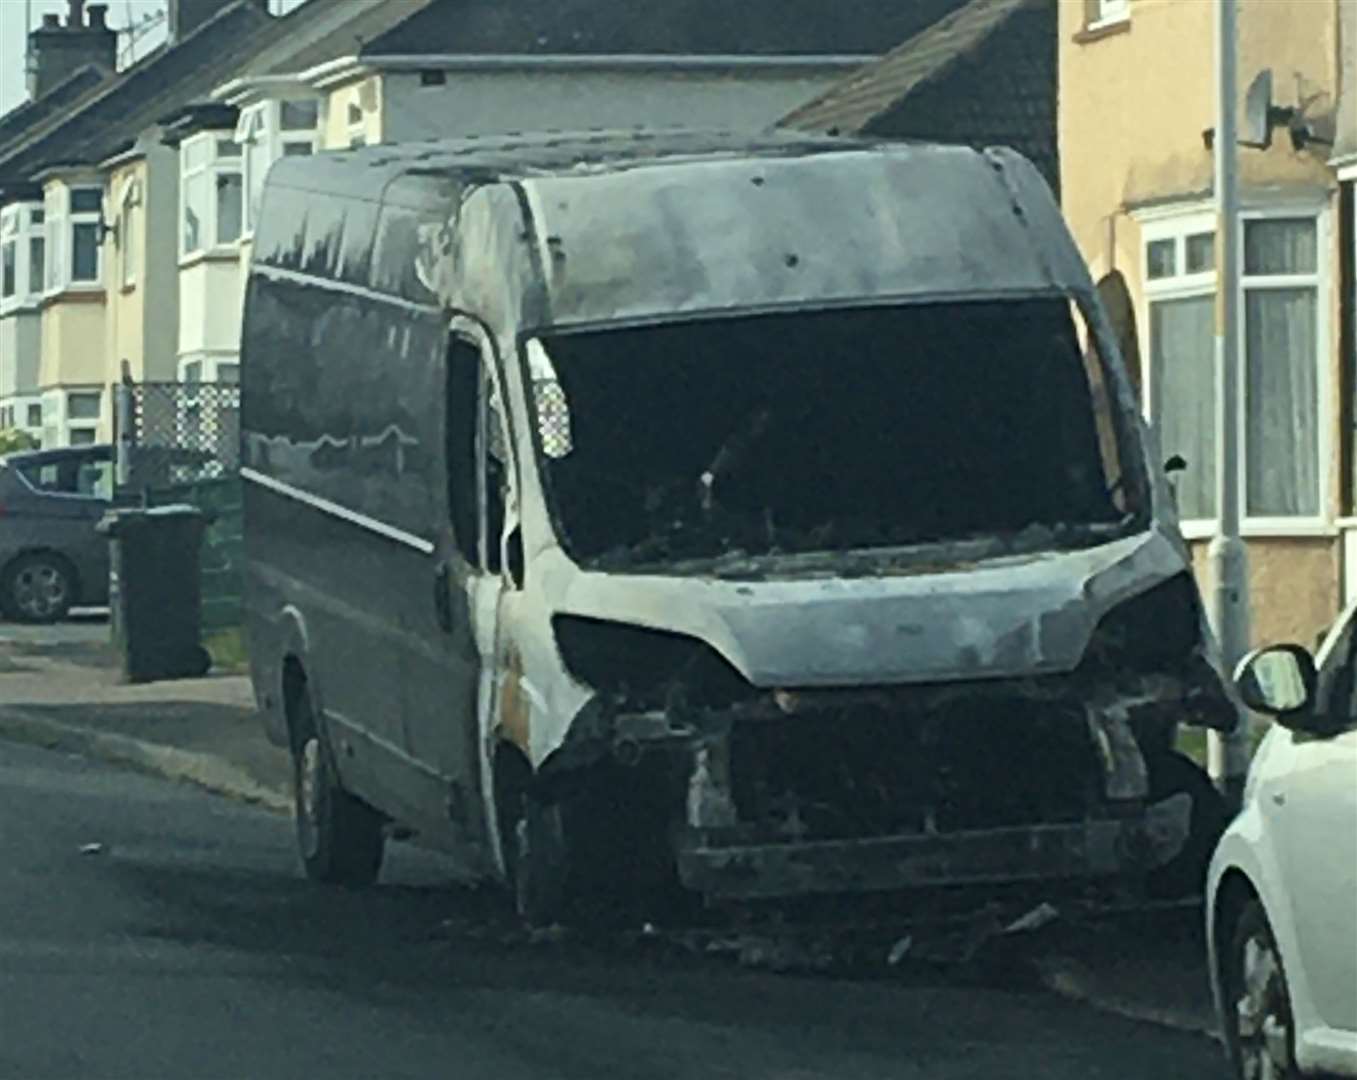 Police are investigating after a van was set alight in Colyer Road, Northfleet, this morning (20563501)